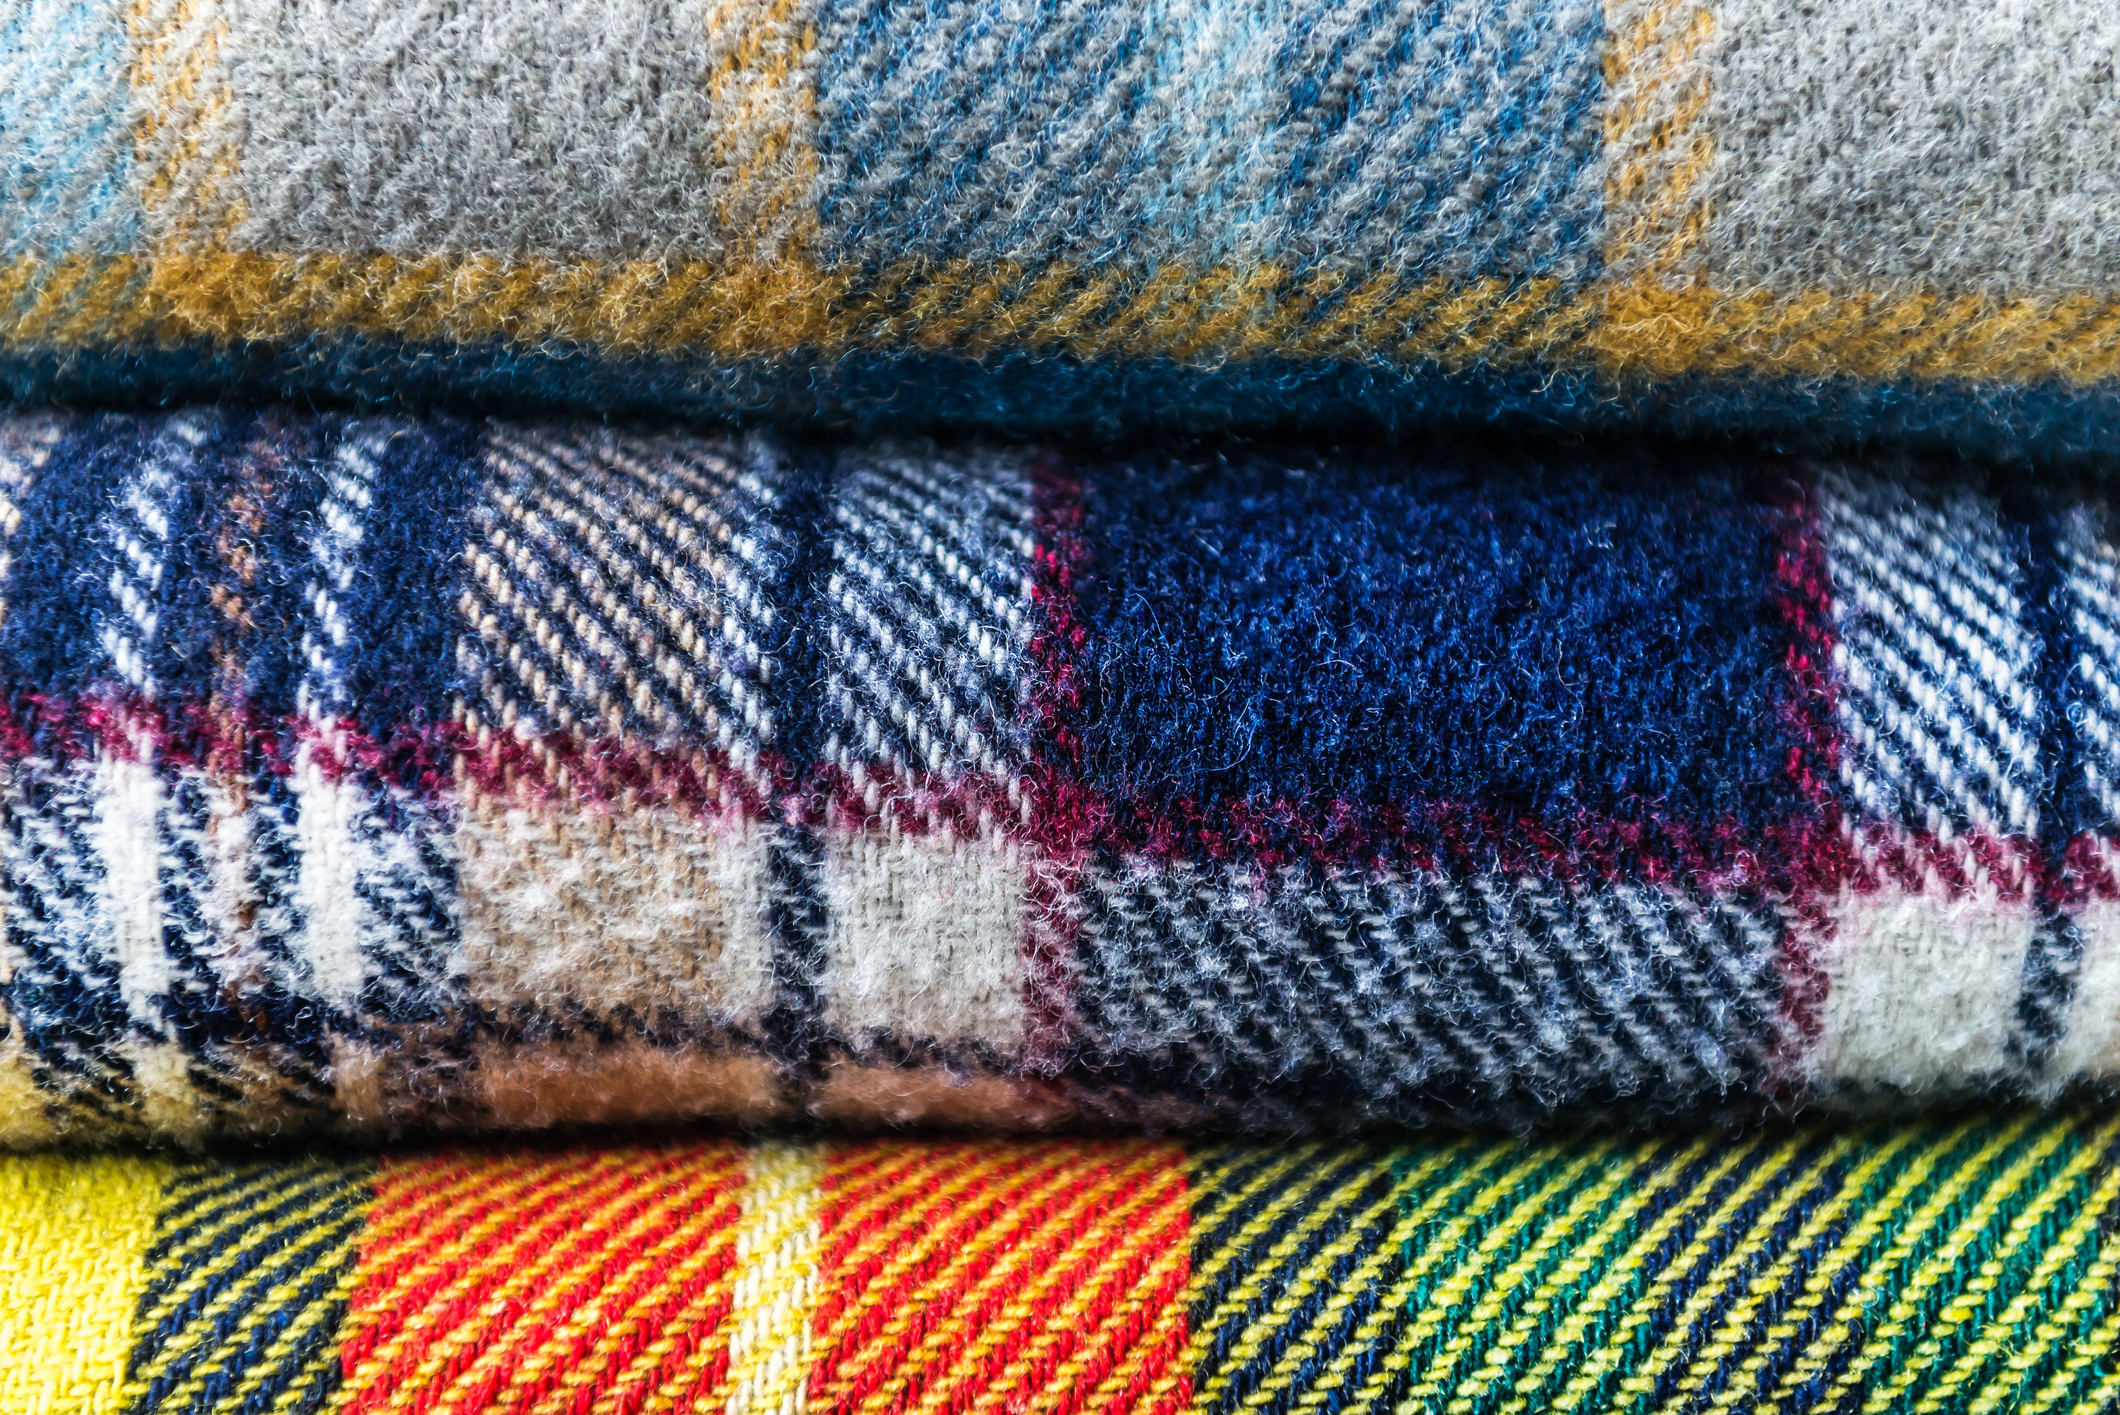 Stack of woolen checked blankets